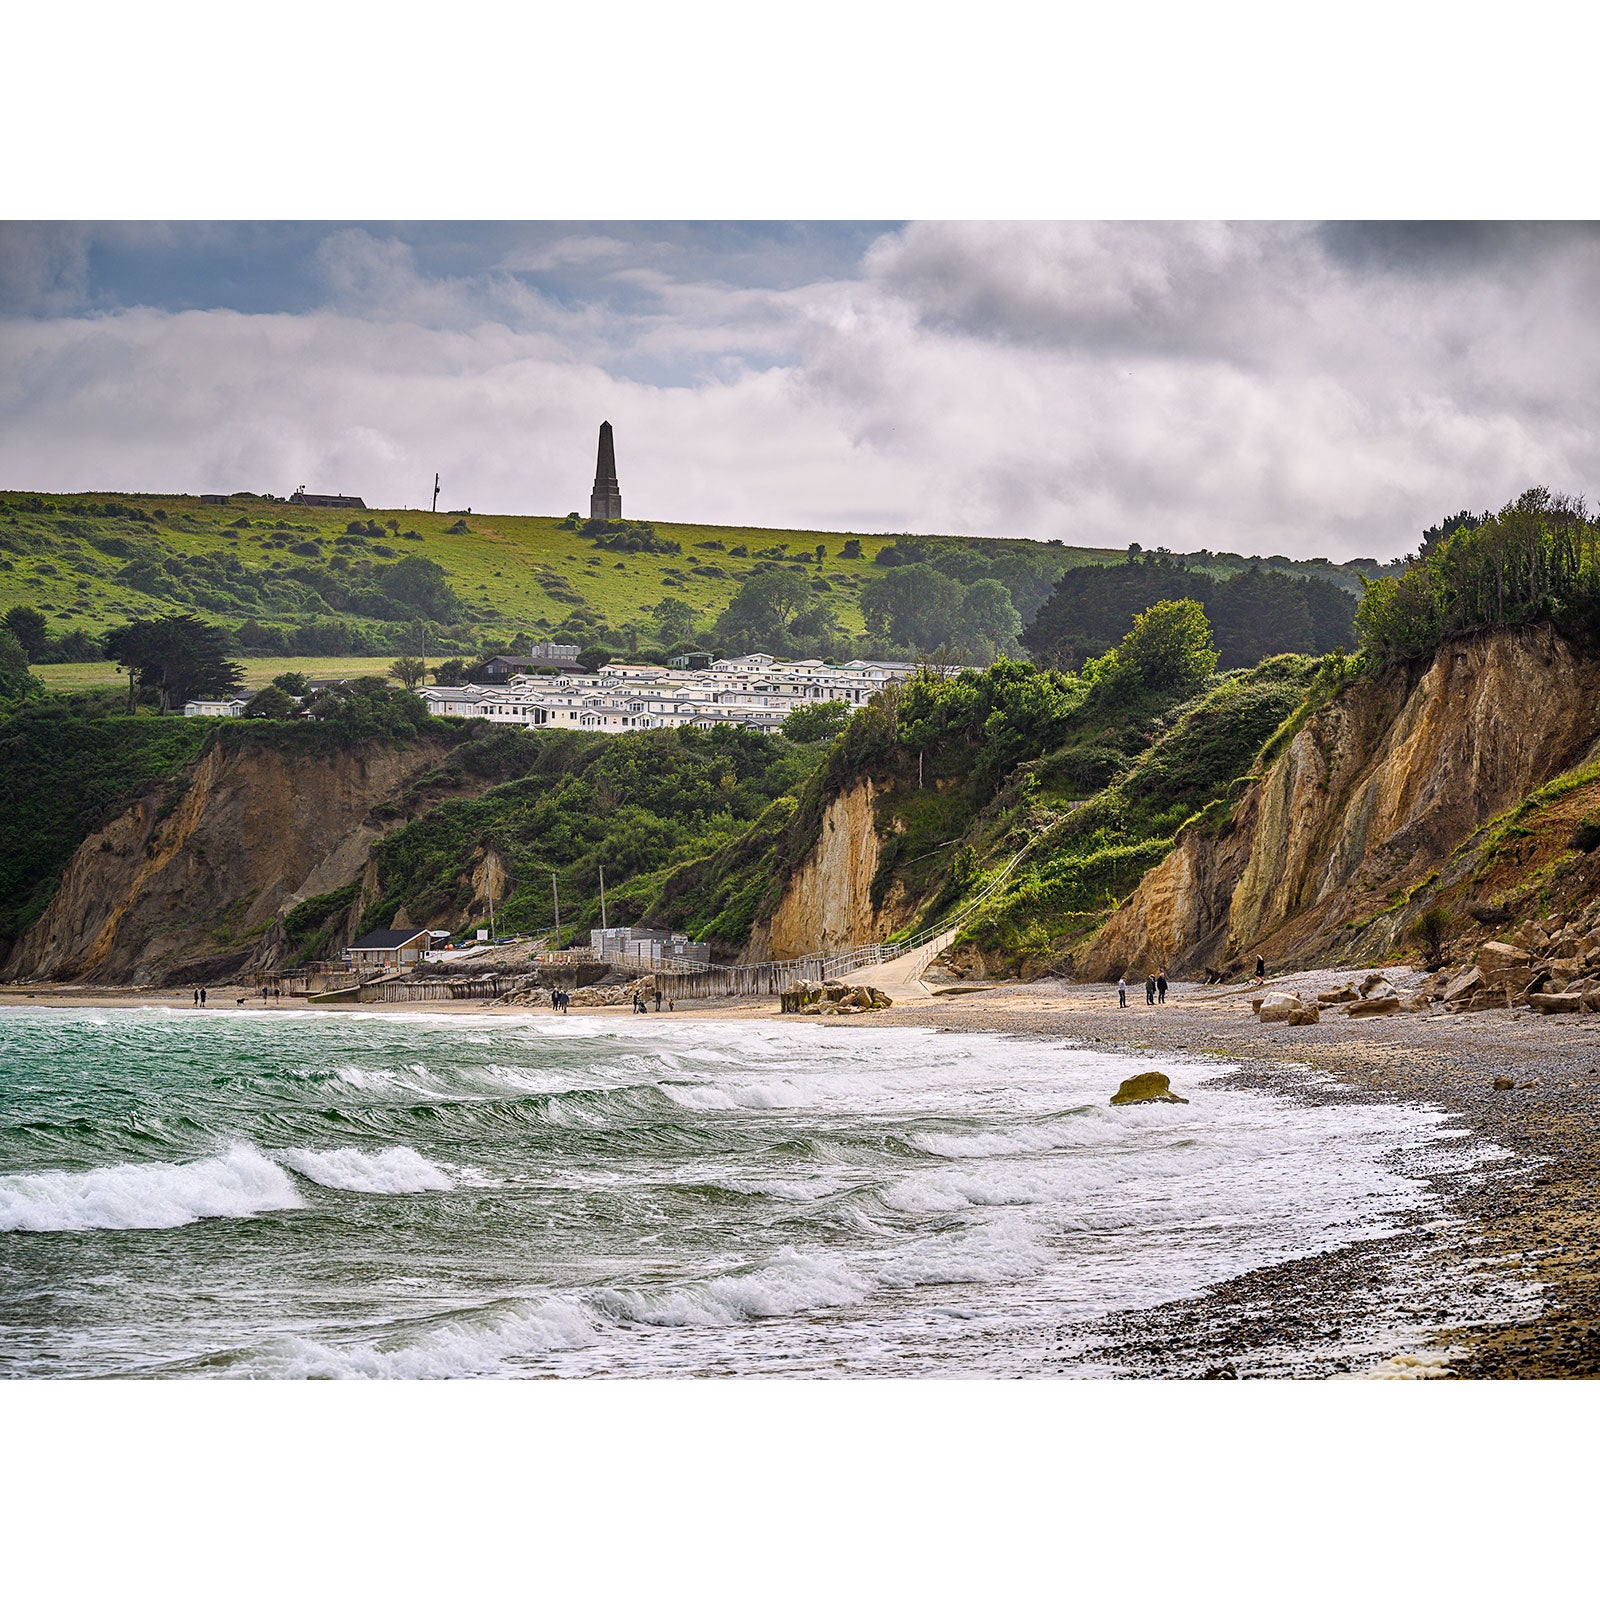 Coastal landscape with cliffs, a pebble beach, and a village near a monument on a hill under a cloudy sky at Whitecliff Bay on the Isle of Wight by Available Light Photography.